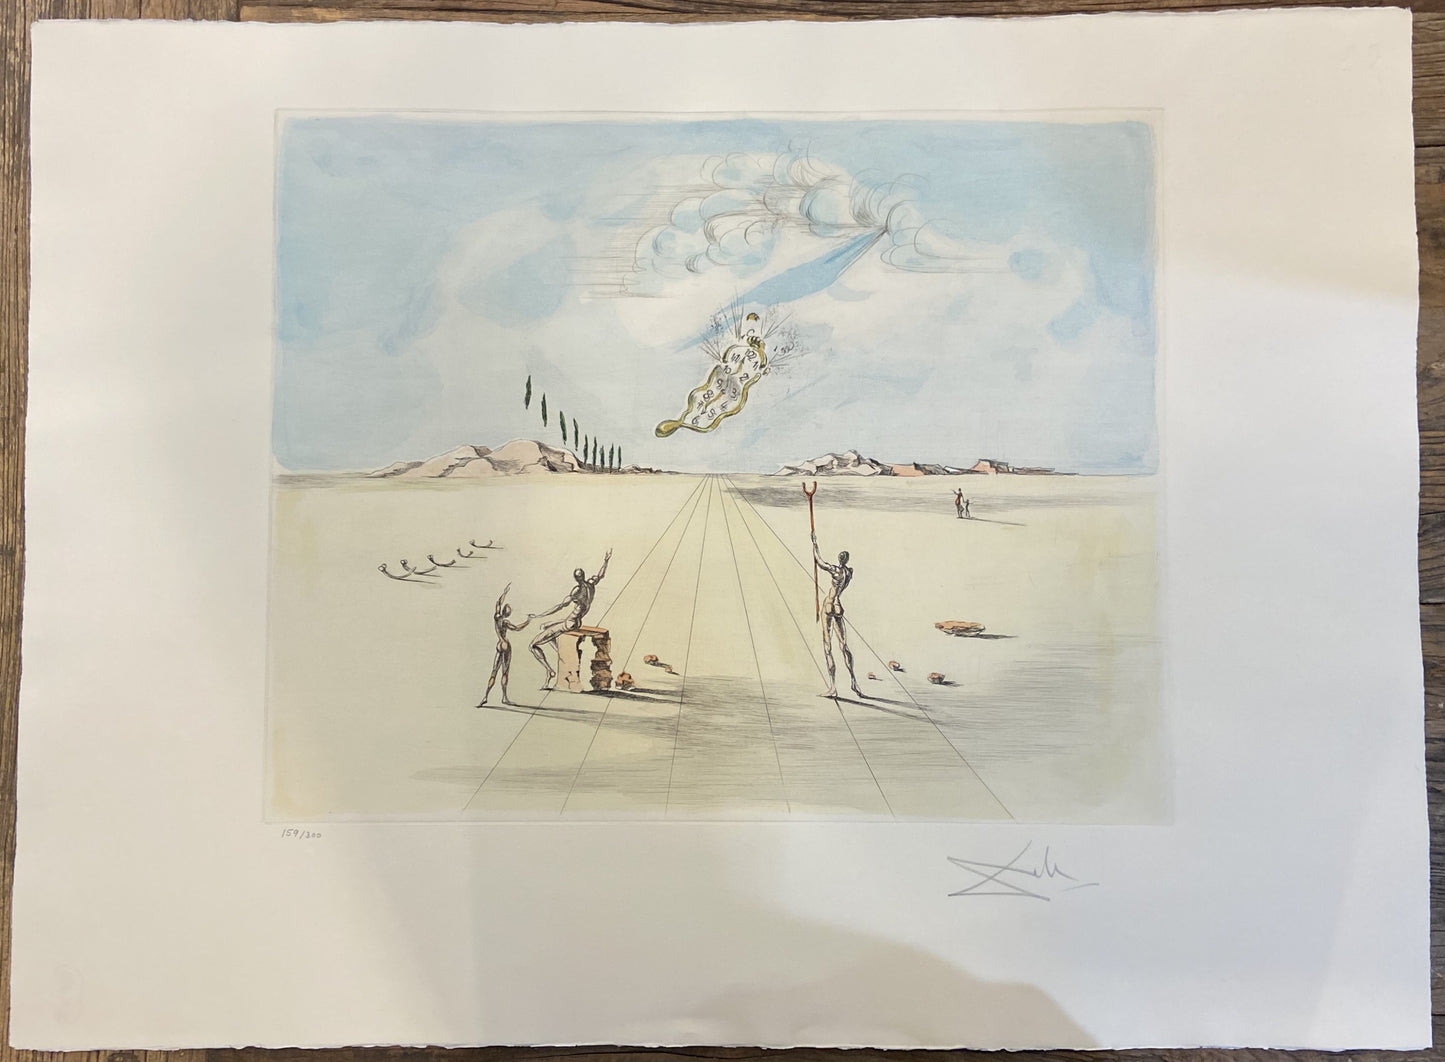 After Salvador Dalí "Moments of Lost Time" Lithograph 159/300 (27812)